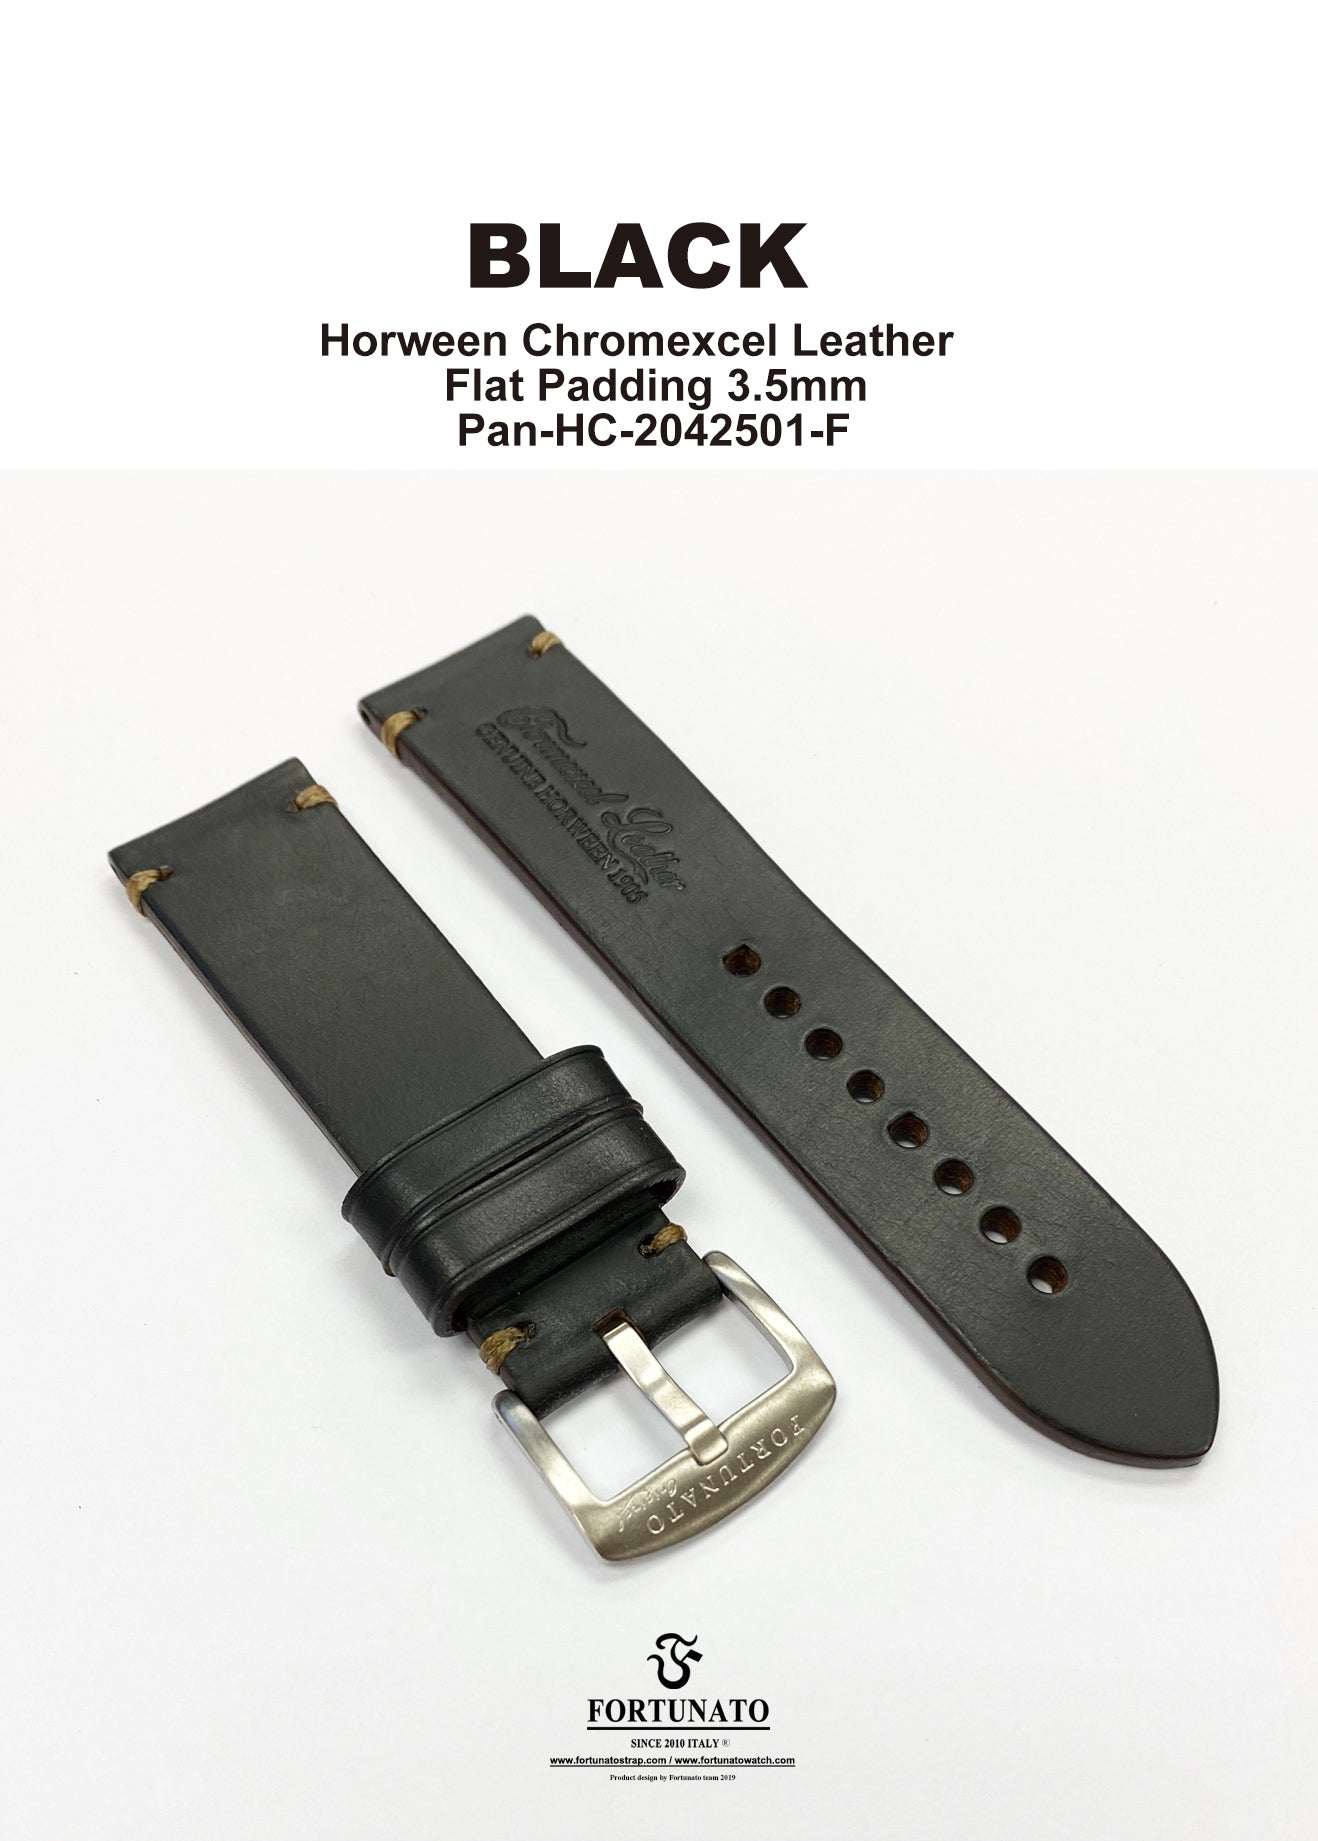 Horween Chromexcel Leather Strap flat padding3.5mm